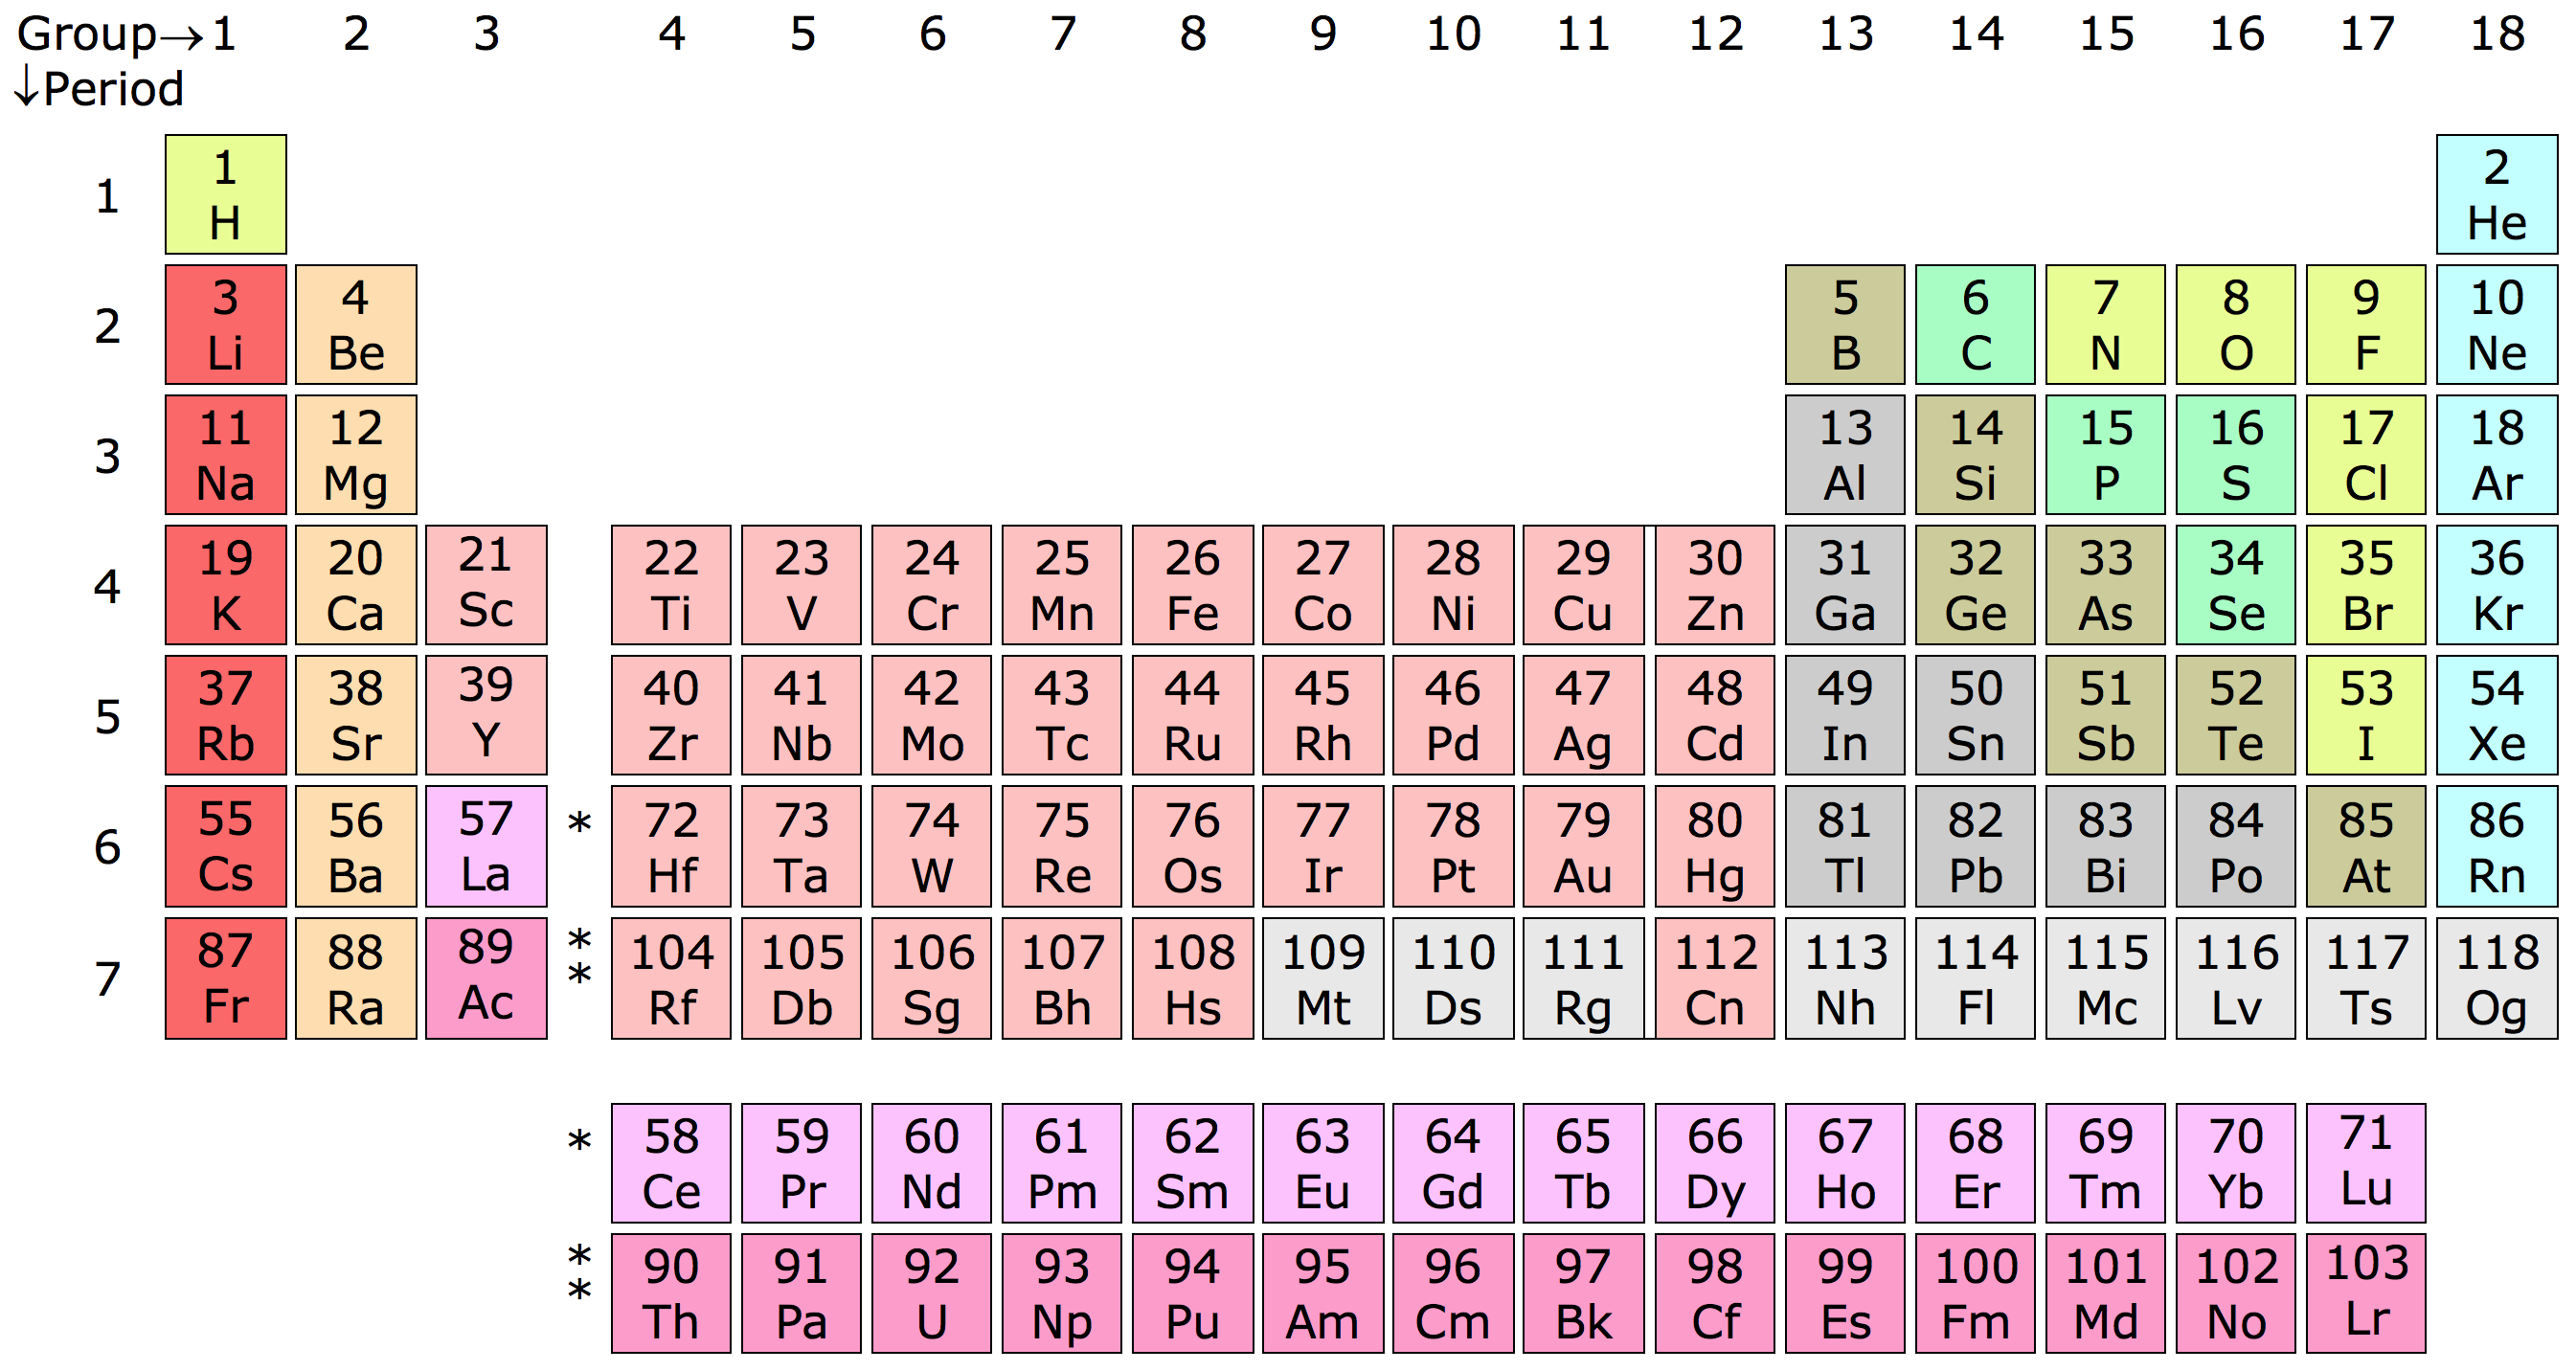 An organized grid-like structure known as the periodic table of elements. It consists of rows and columns that contain symbols and numbers representing different chemical elements. The elements are arranged in increasing order based on their atomic number, from left to right and top to bottom. Each element is depicted by its symbol, such as H for hydrogen, followed by its atomic number and atomic weight. The table is color-coded to group elements with similar properties.